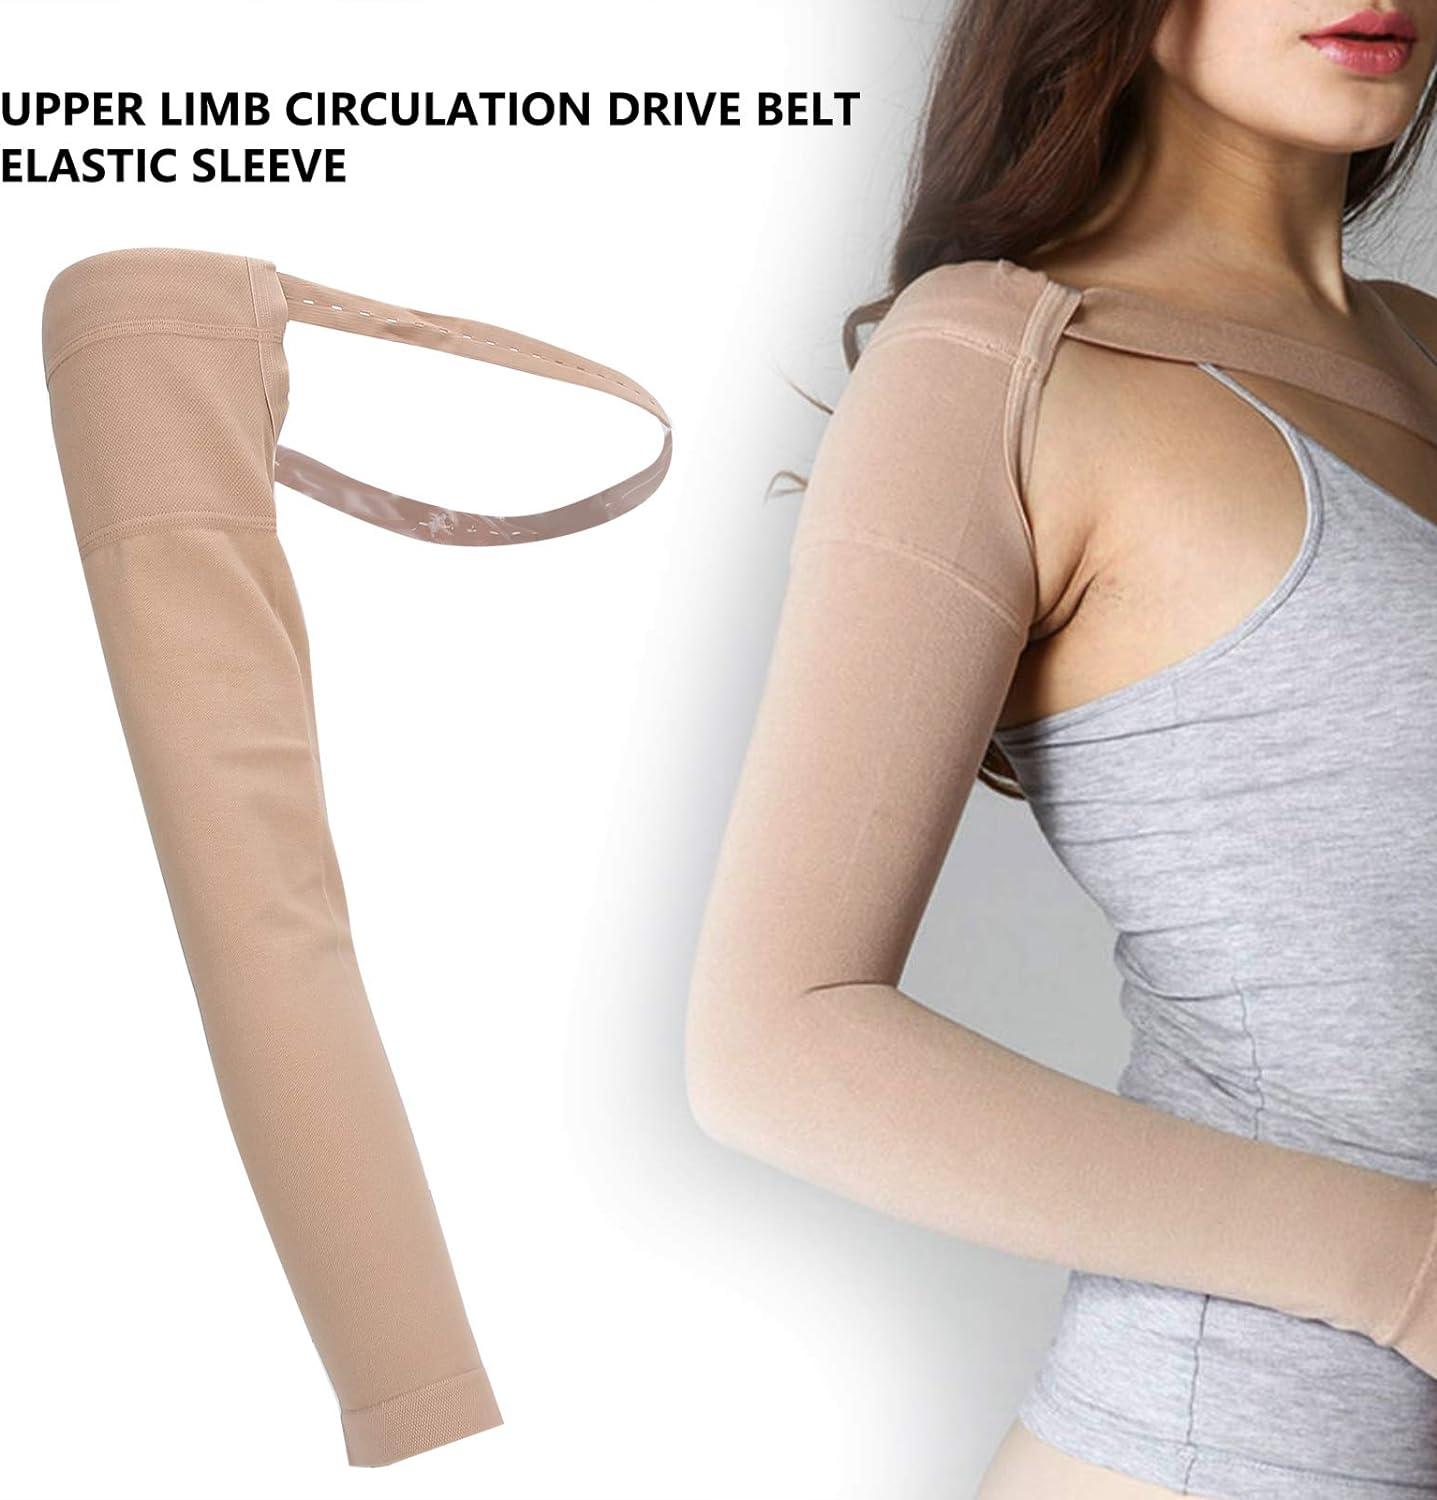 Post Mastectomy Compression Sleeve Elastic Lymphedema Sleeve Arm Swelling Arm  Lymphedema Edema Arm Support Brace for Preventing Arm Lymphedema and Other  Symptoms(XL)